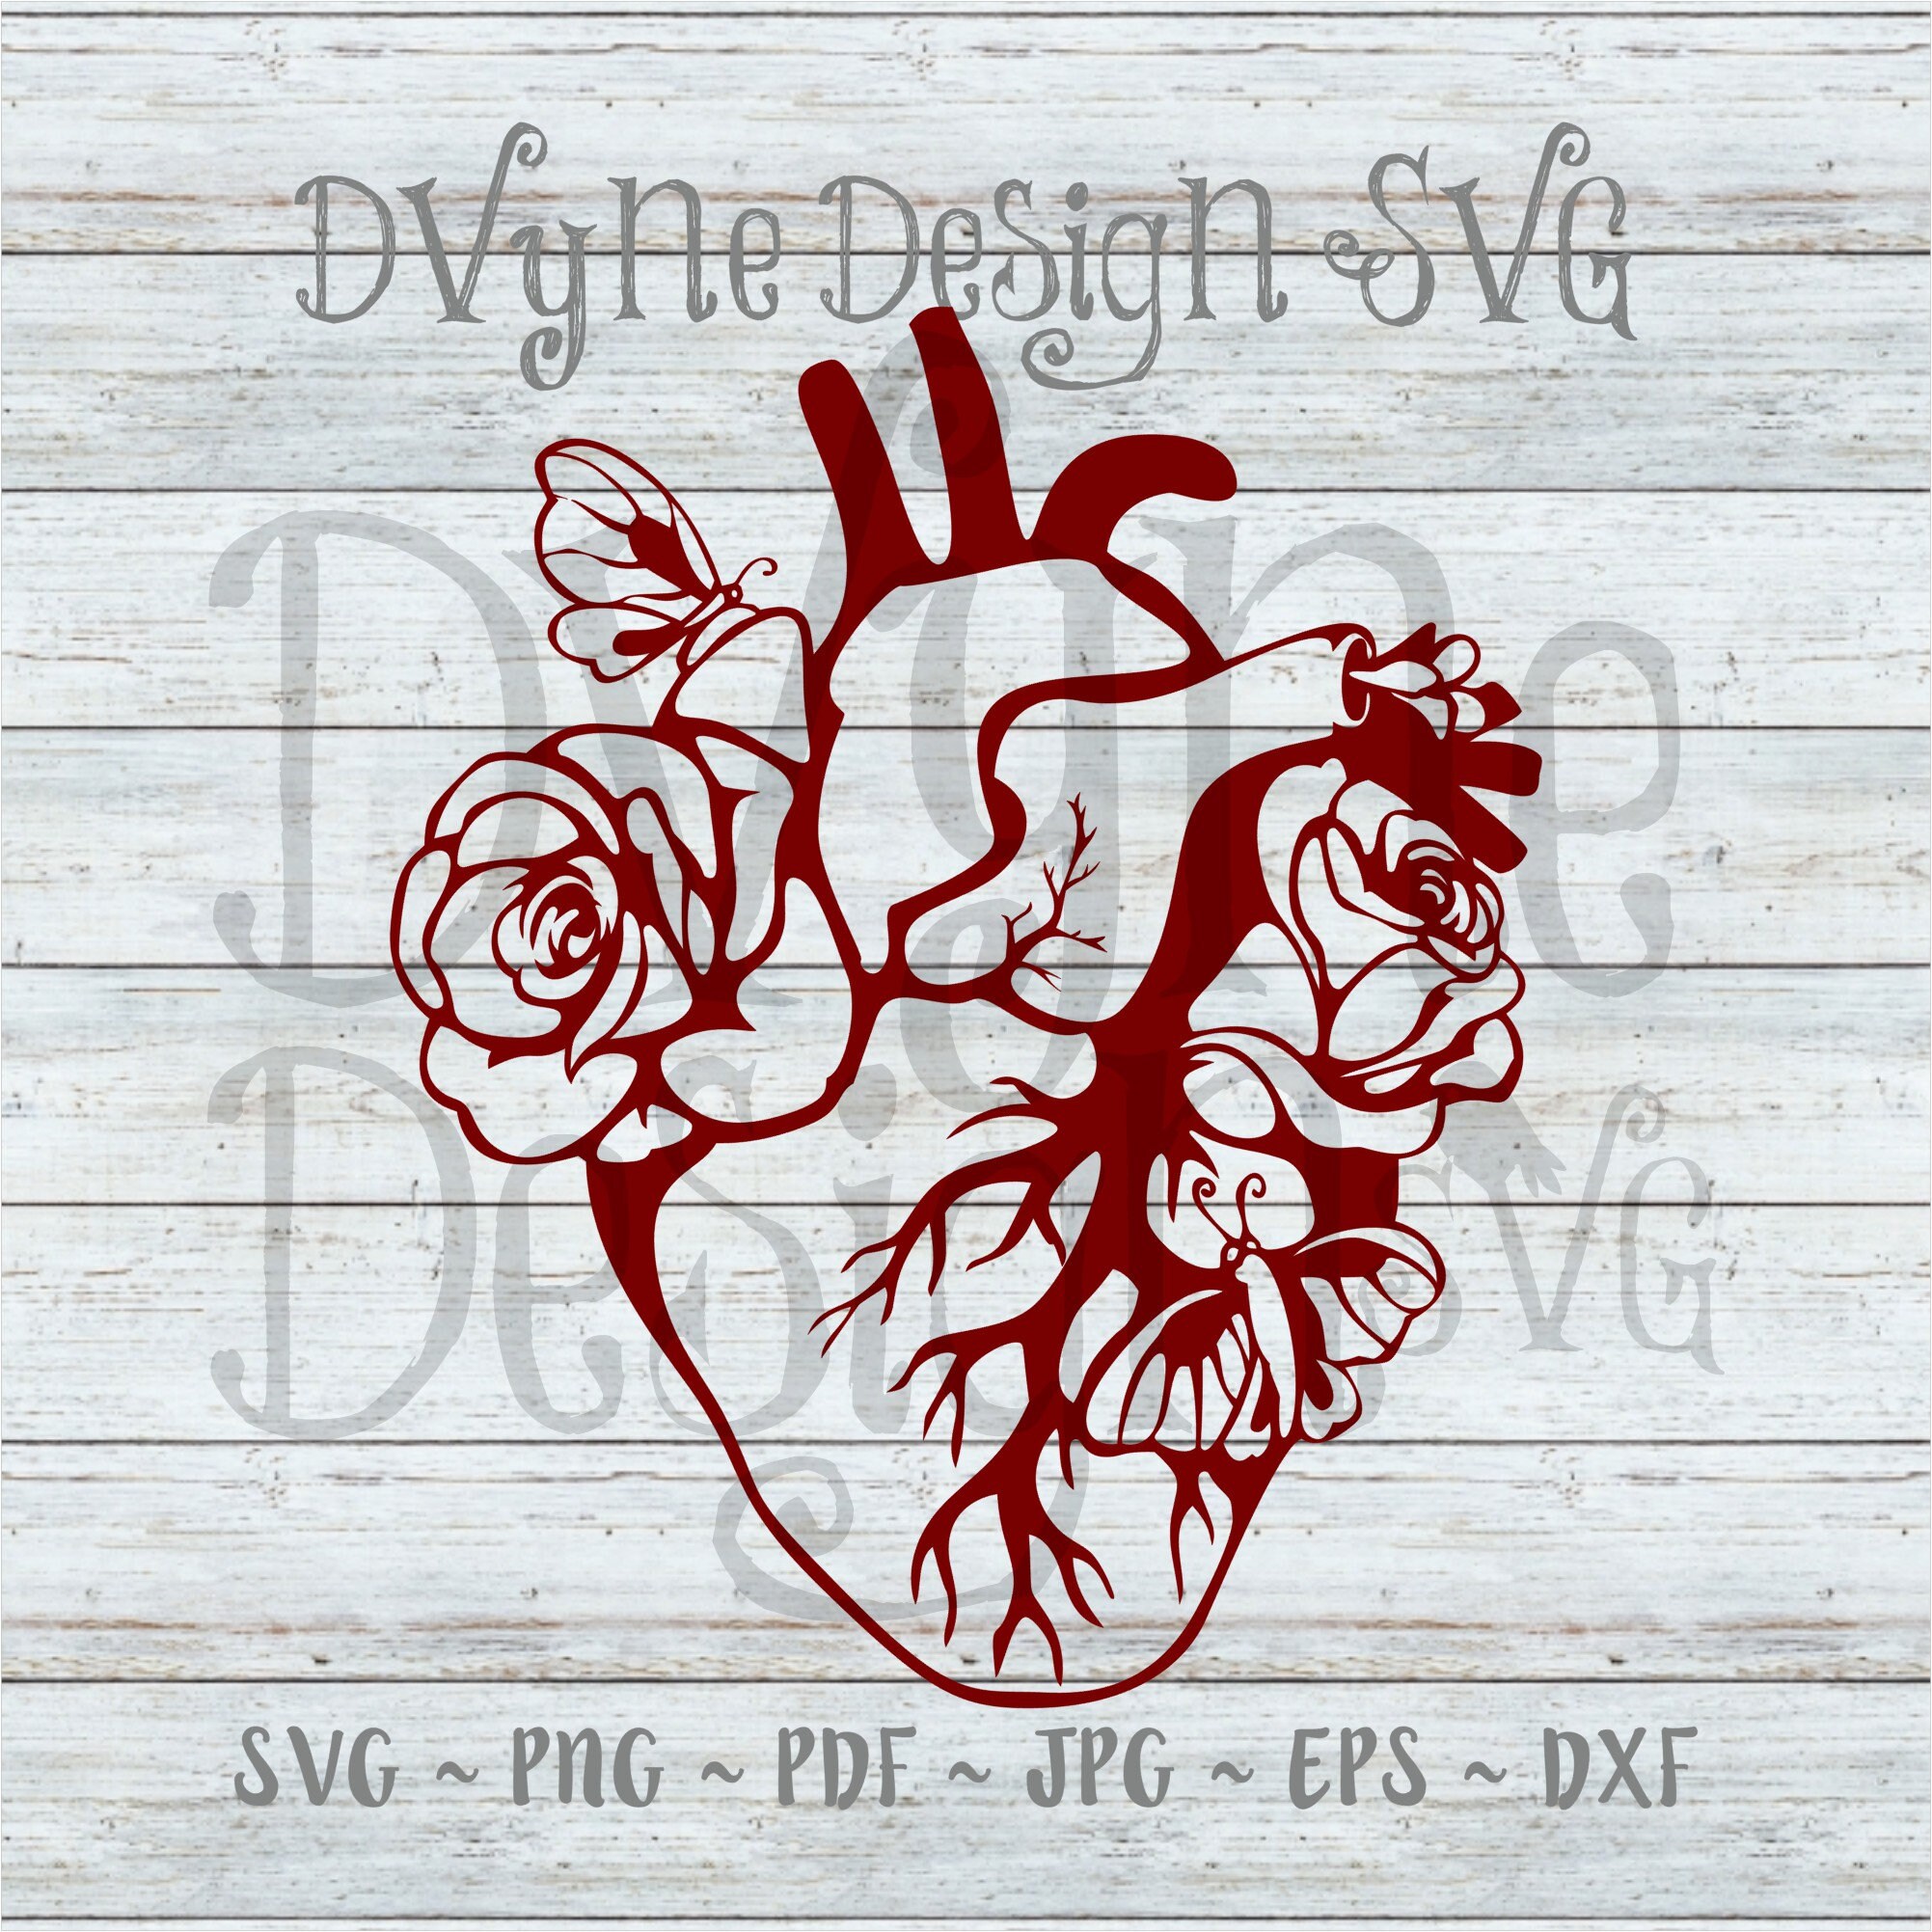 Cardiology Svg Anatomical Heart With Roses Vinyl Cut File For Etsy